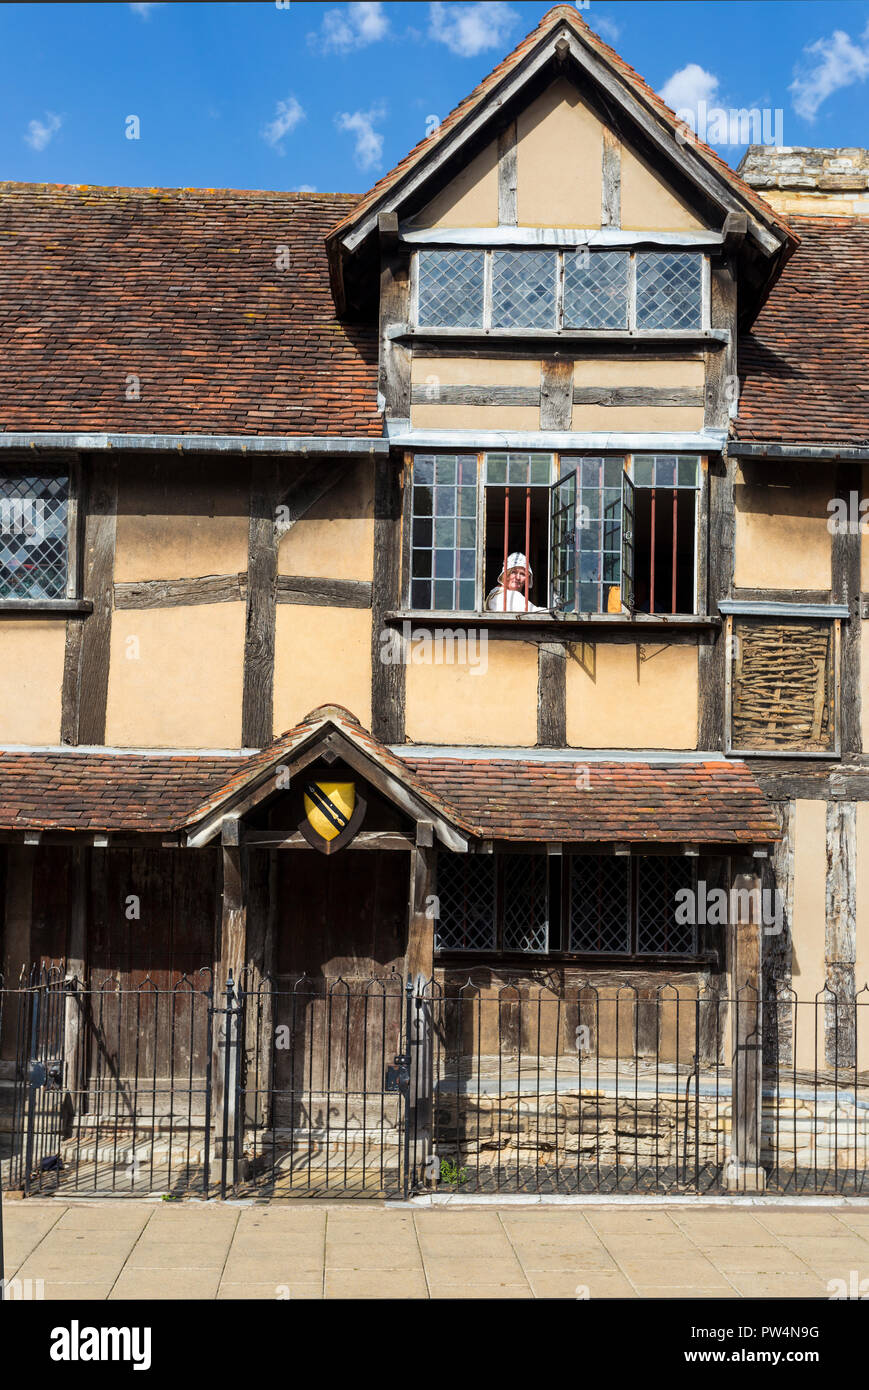 STRATFORD-UPON-AVON, ENGLAND - August 6, 2018: Shakespeare's birthplace, with an actress in period costume looking out of the window Stock Photo